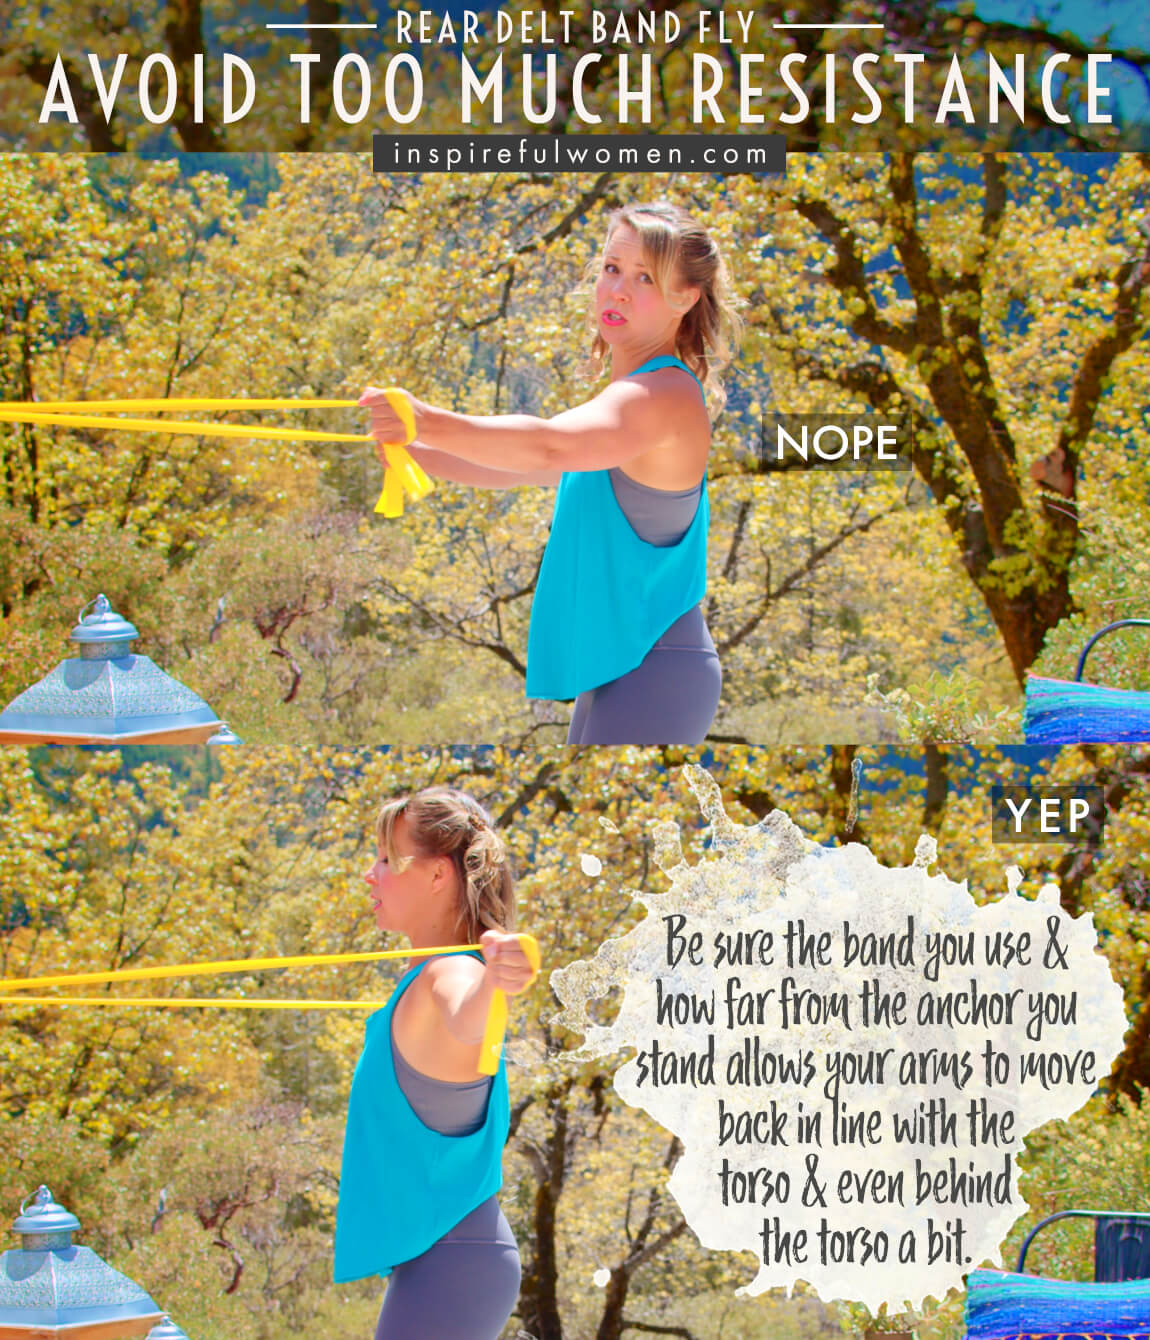 avoid-too-much-resistance-standing-rear-delt-banded-fly-wall-anchored-proper-form